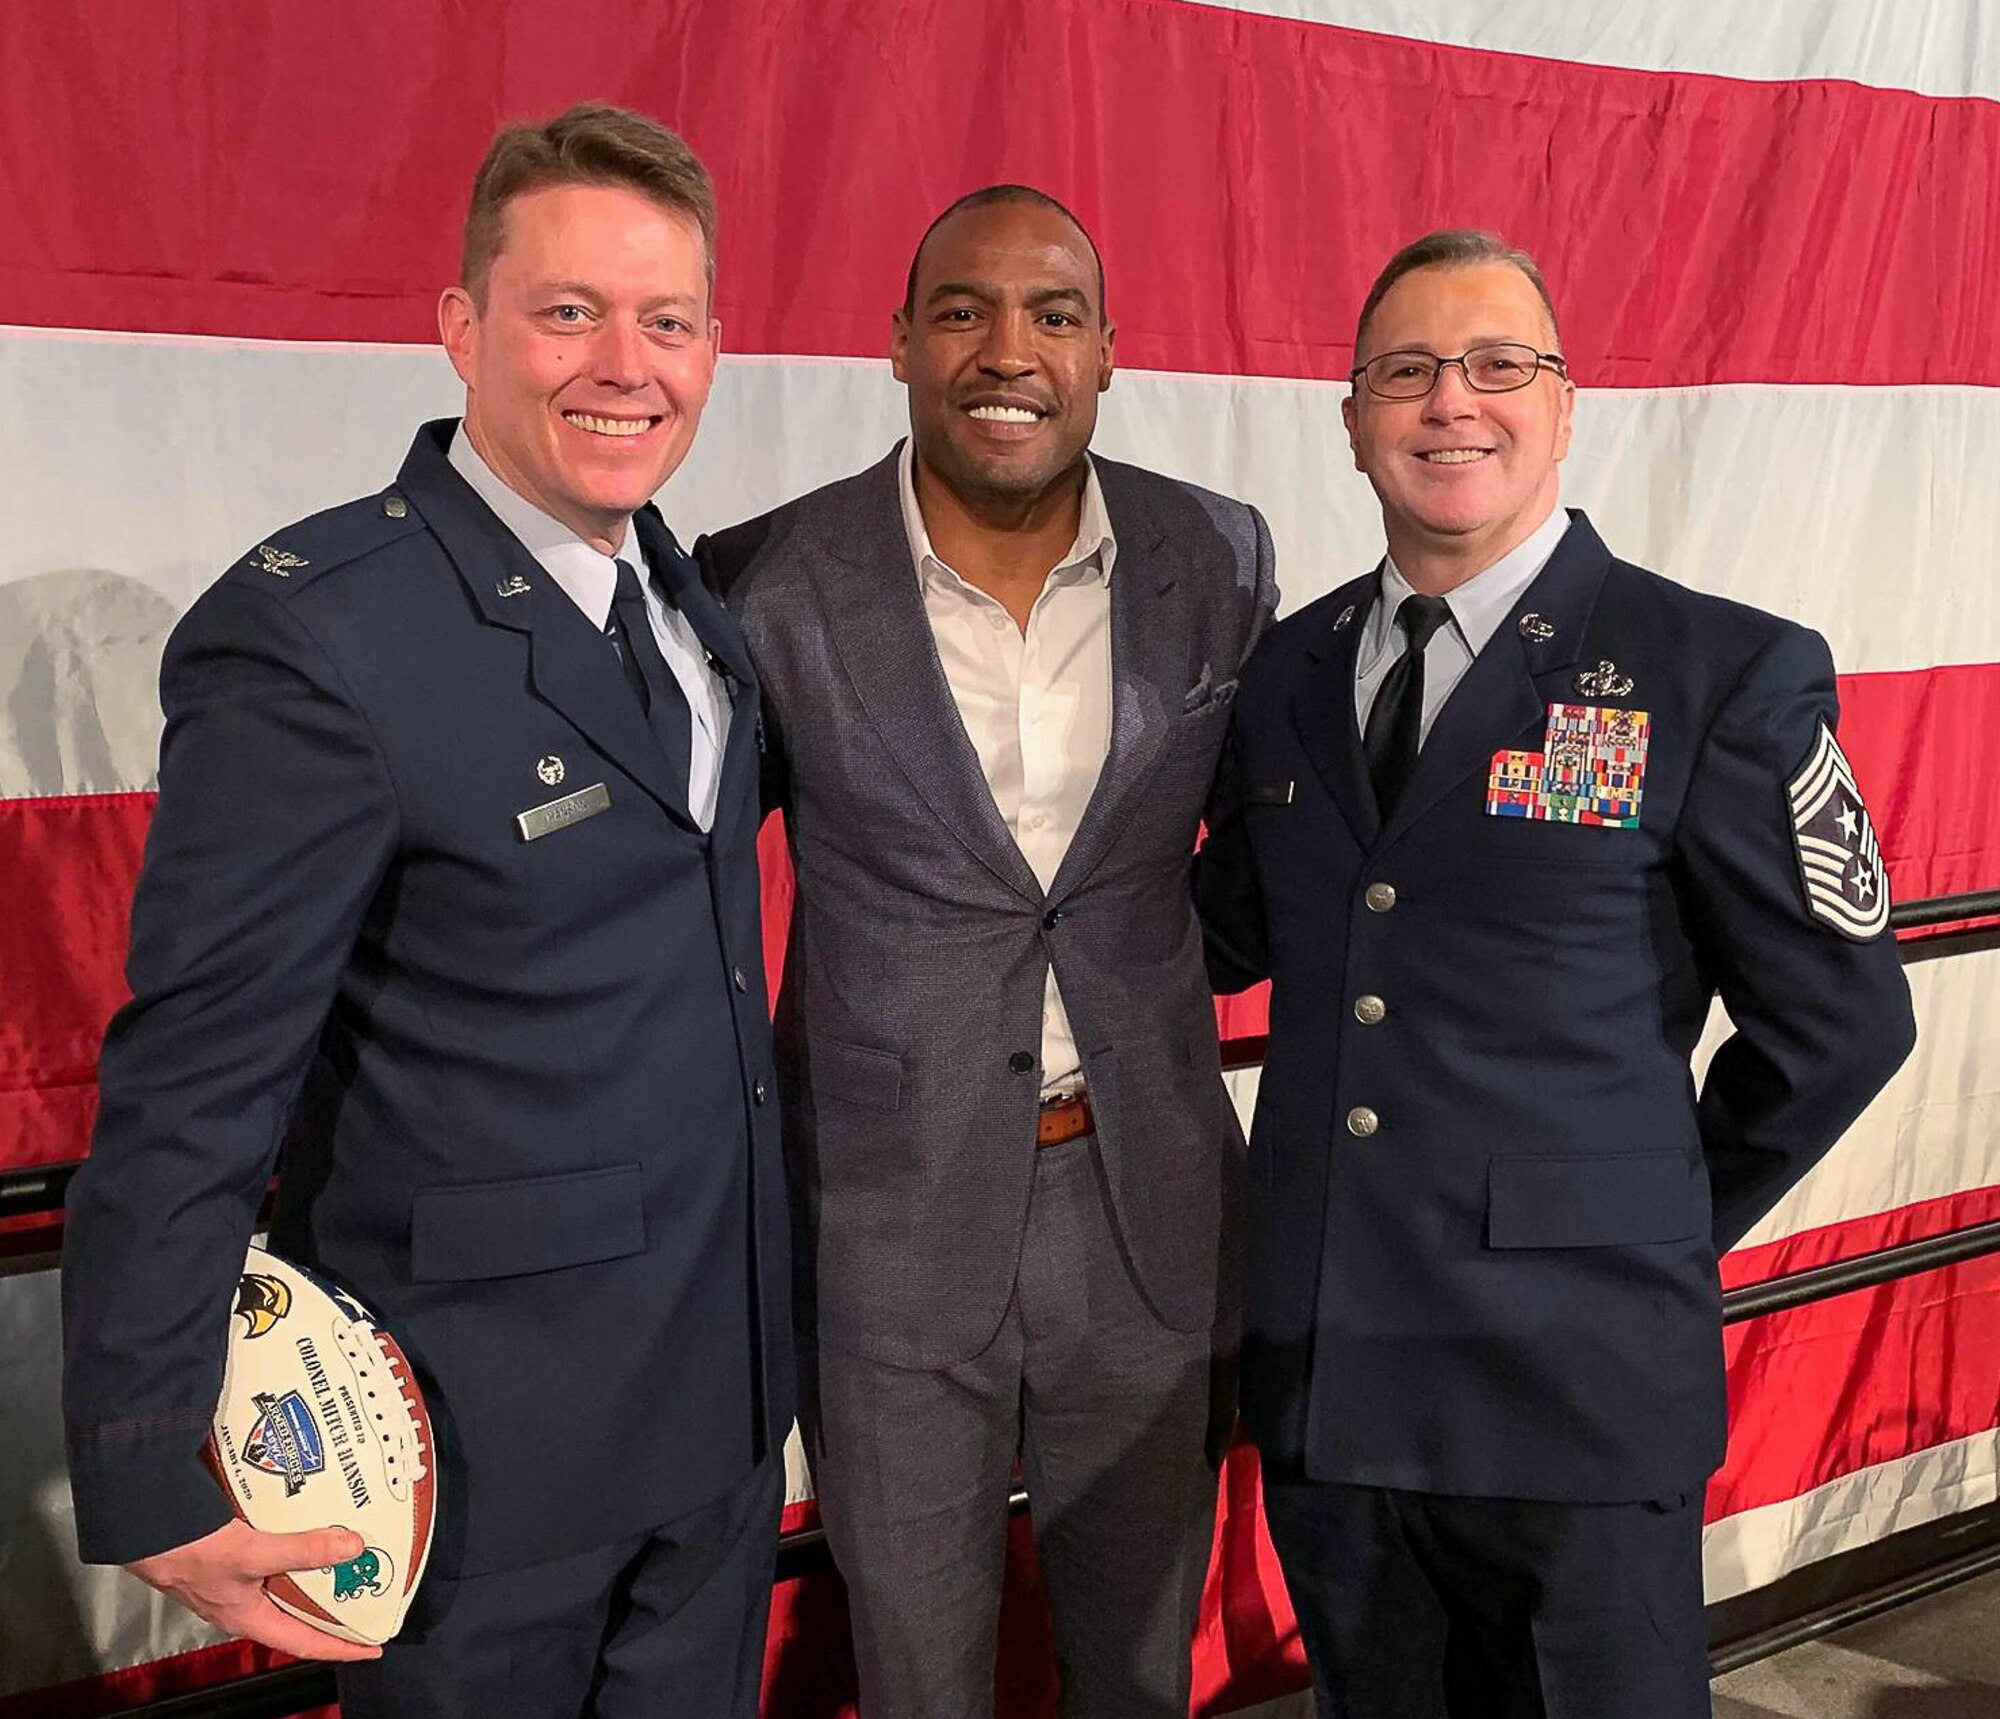 The 301st Fighter Wing’s Commander Col. Mitch Hanson and Command Chief Rob Safley speak with Lockheed Martin Armed Forces Bowl Kick-Off Luncheon Keynote Speaker Darren Woodson at the Fort Worth Convention Center on January 3, 2020 in Fort Worth, Texas. Woodson, a three-time Super Bowl champion and five-time Pro Bowl selection for the Dallas Cowboys, shared how the military has affected his life and why they have his utmost respect. (U.S. Air Force photo by Capt. Jessica Gross)